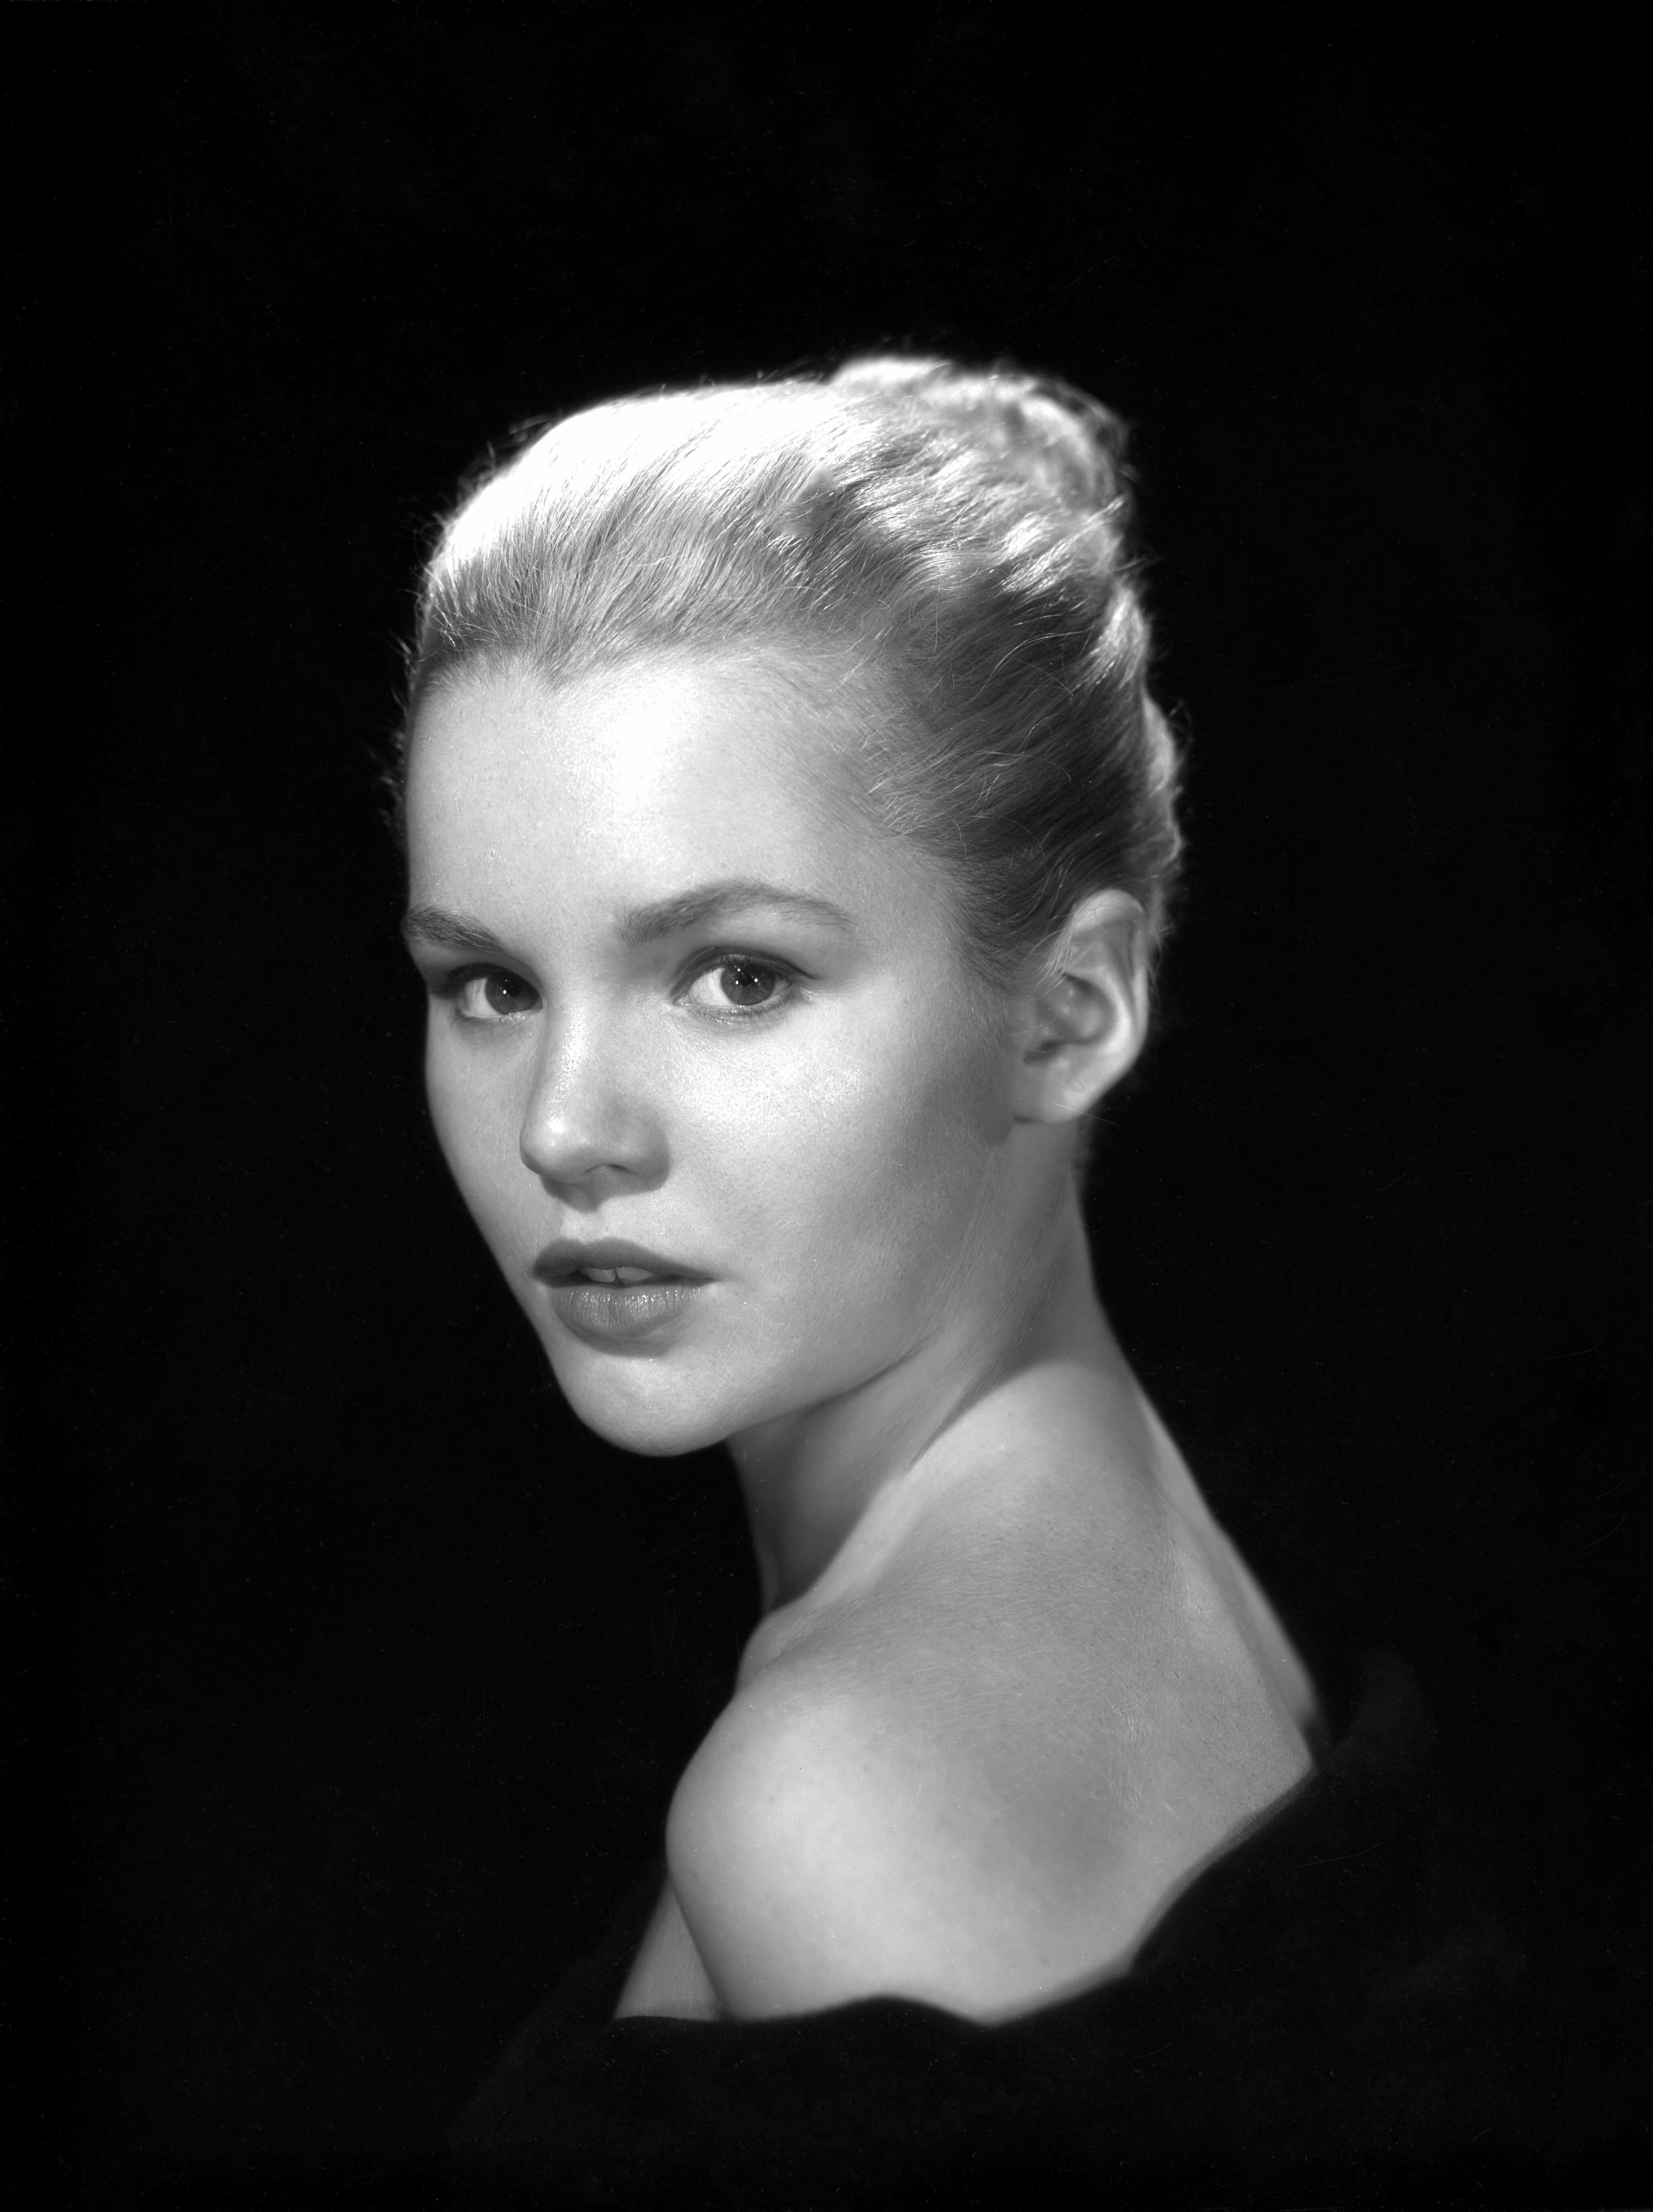 Unknown Black and White Photograph - Tuesday Weld: Young and Glamorous II Movie Star News Fine Art Print